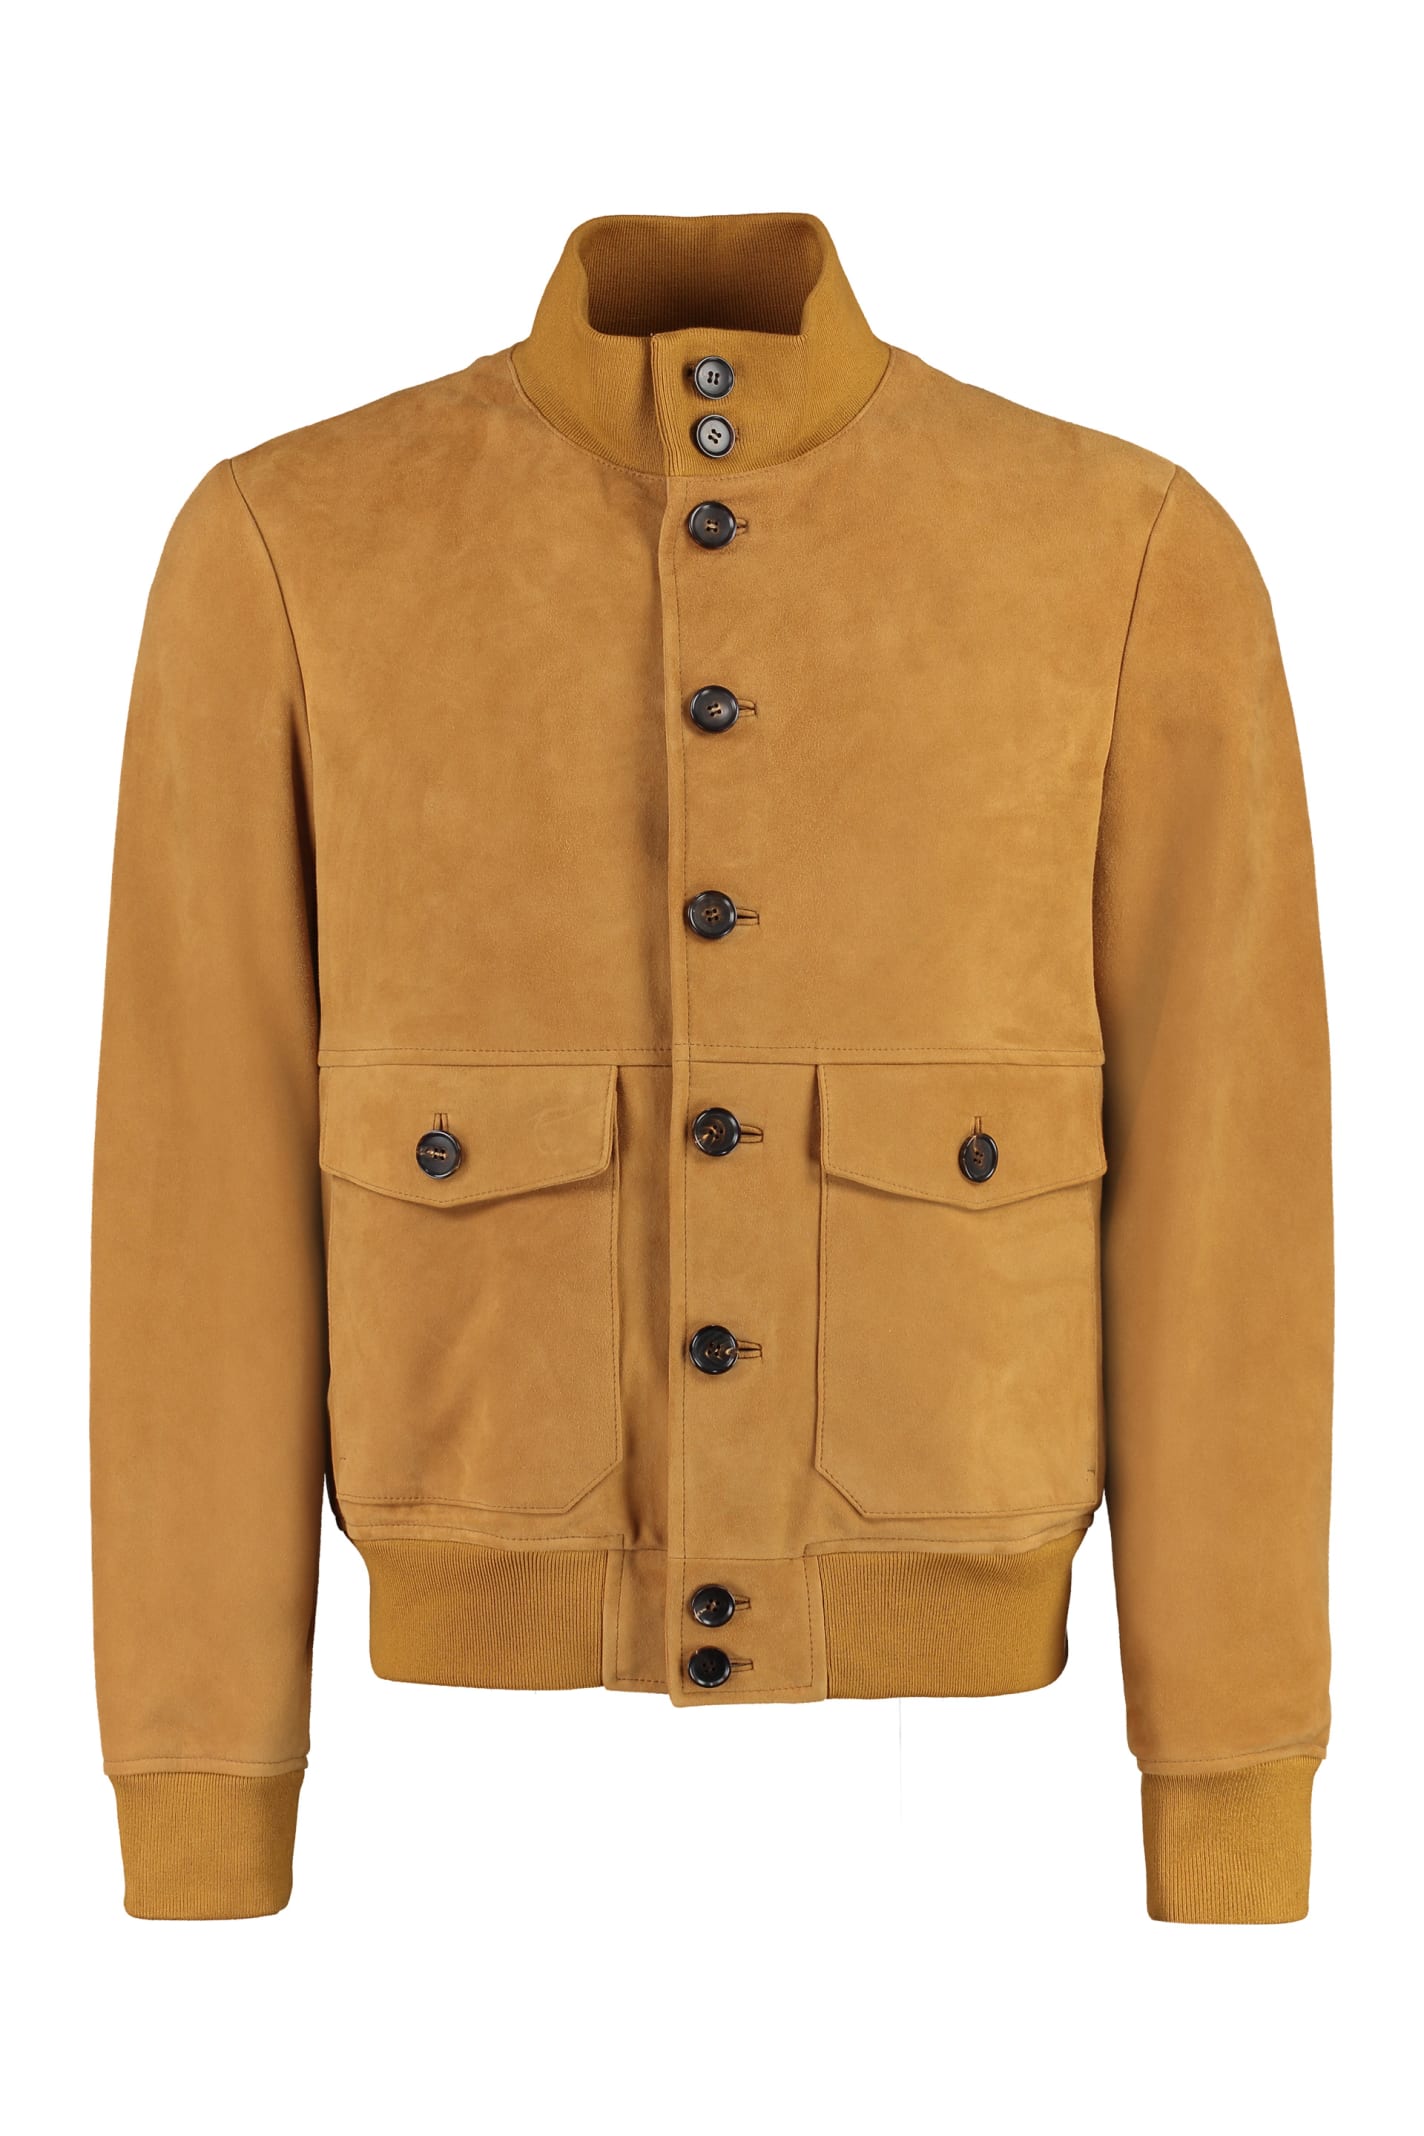 Bally Suede Jacket